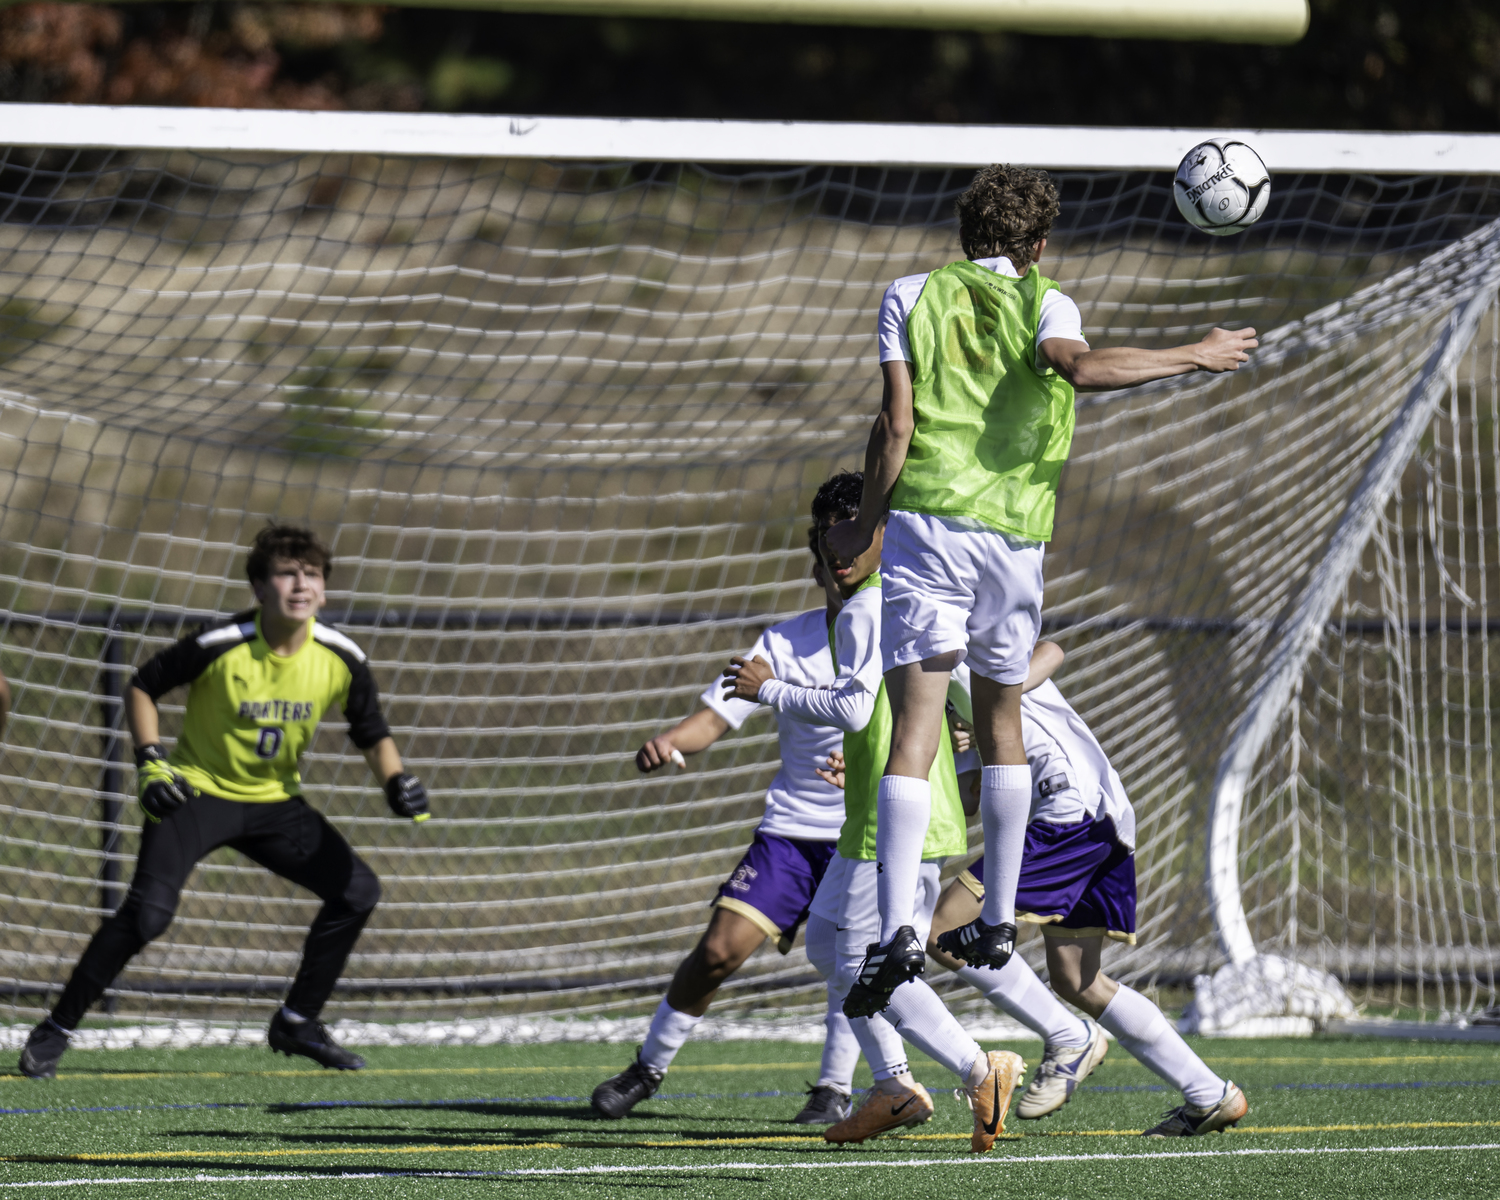 Pierson junior Andy Wayne directs the ball with a header to the opposite side of the net for a goal.   MARIANNE BARNETT